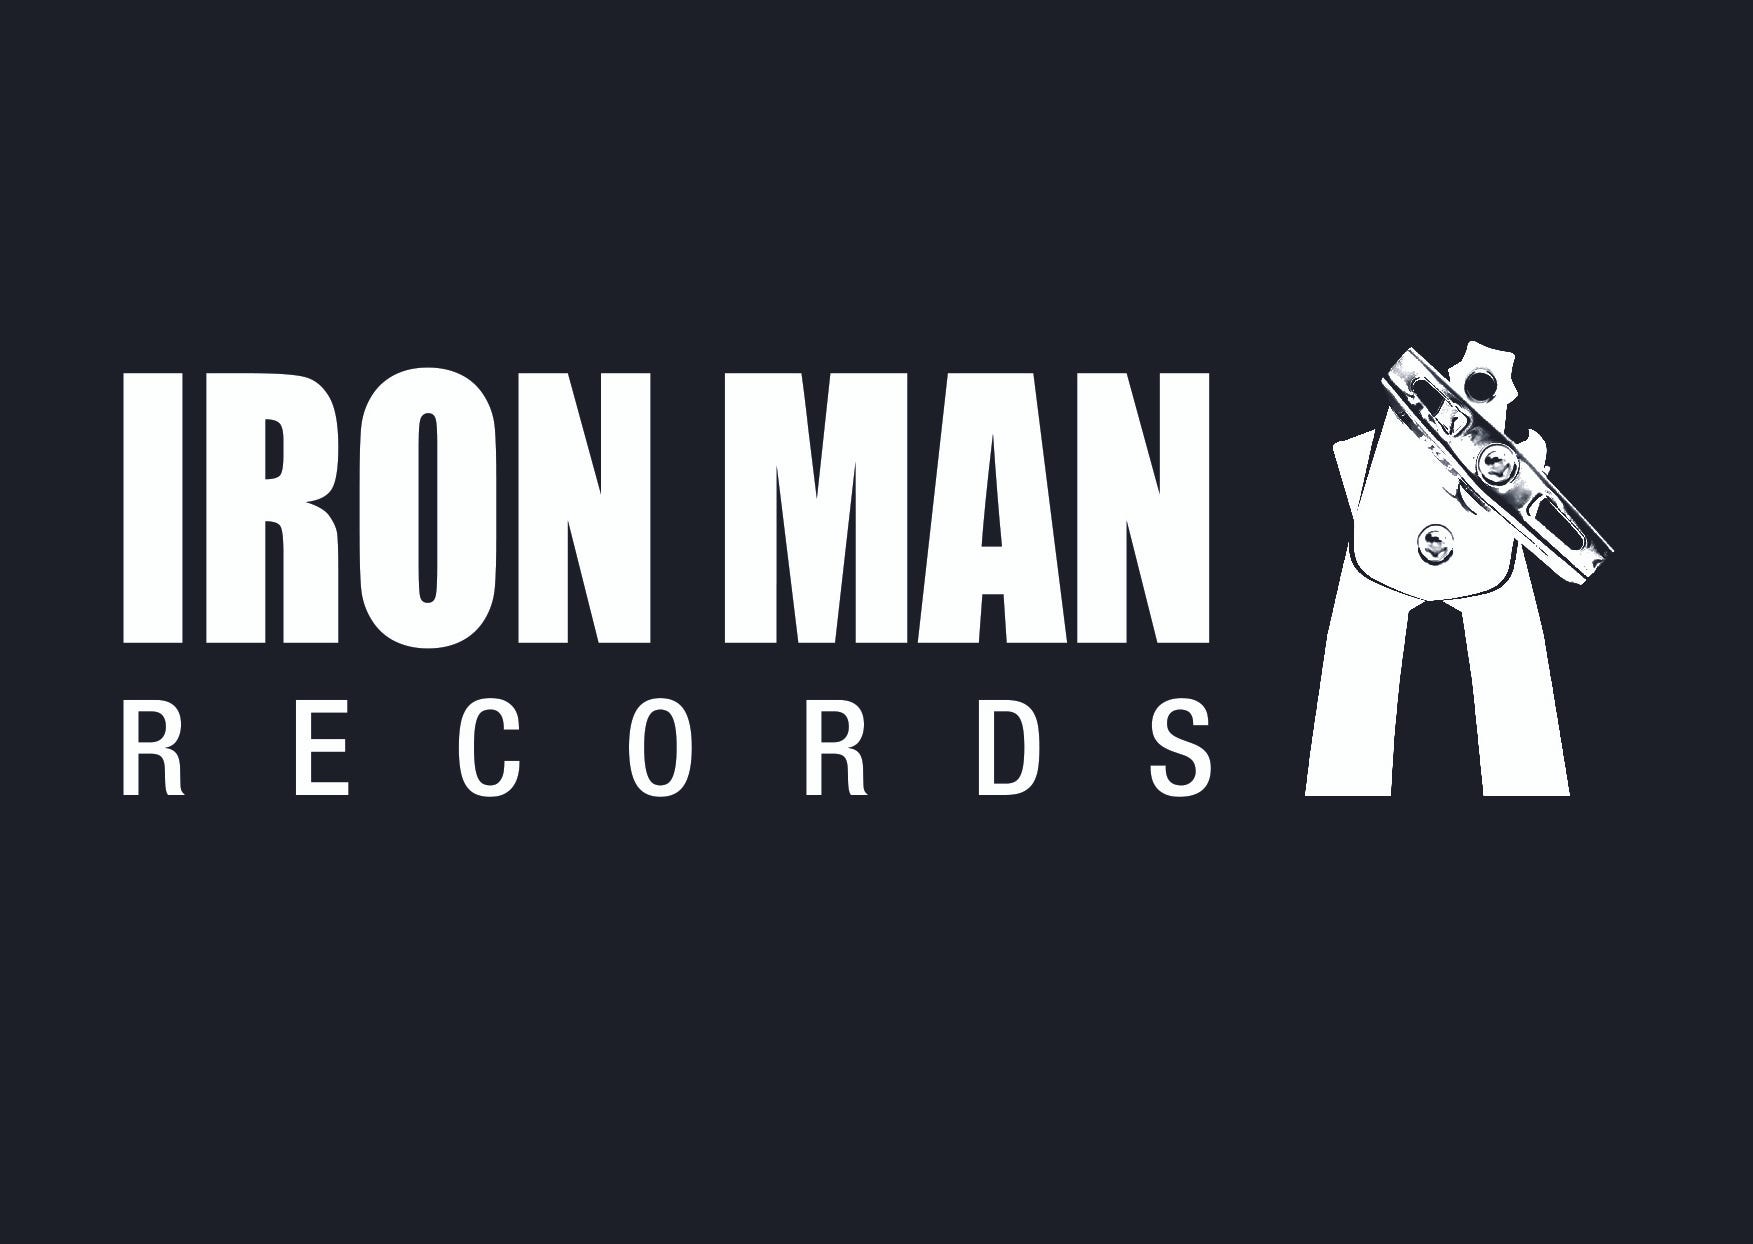 Where do you see Independent Record Labels heading in the future? | by Mark  at Iron Man Records | Medium